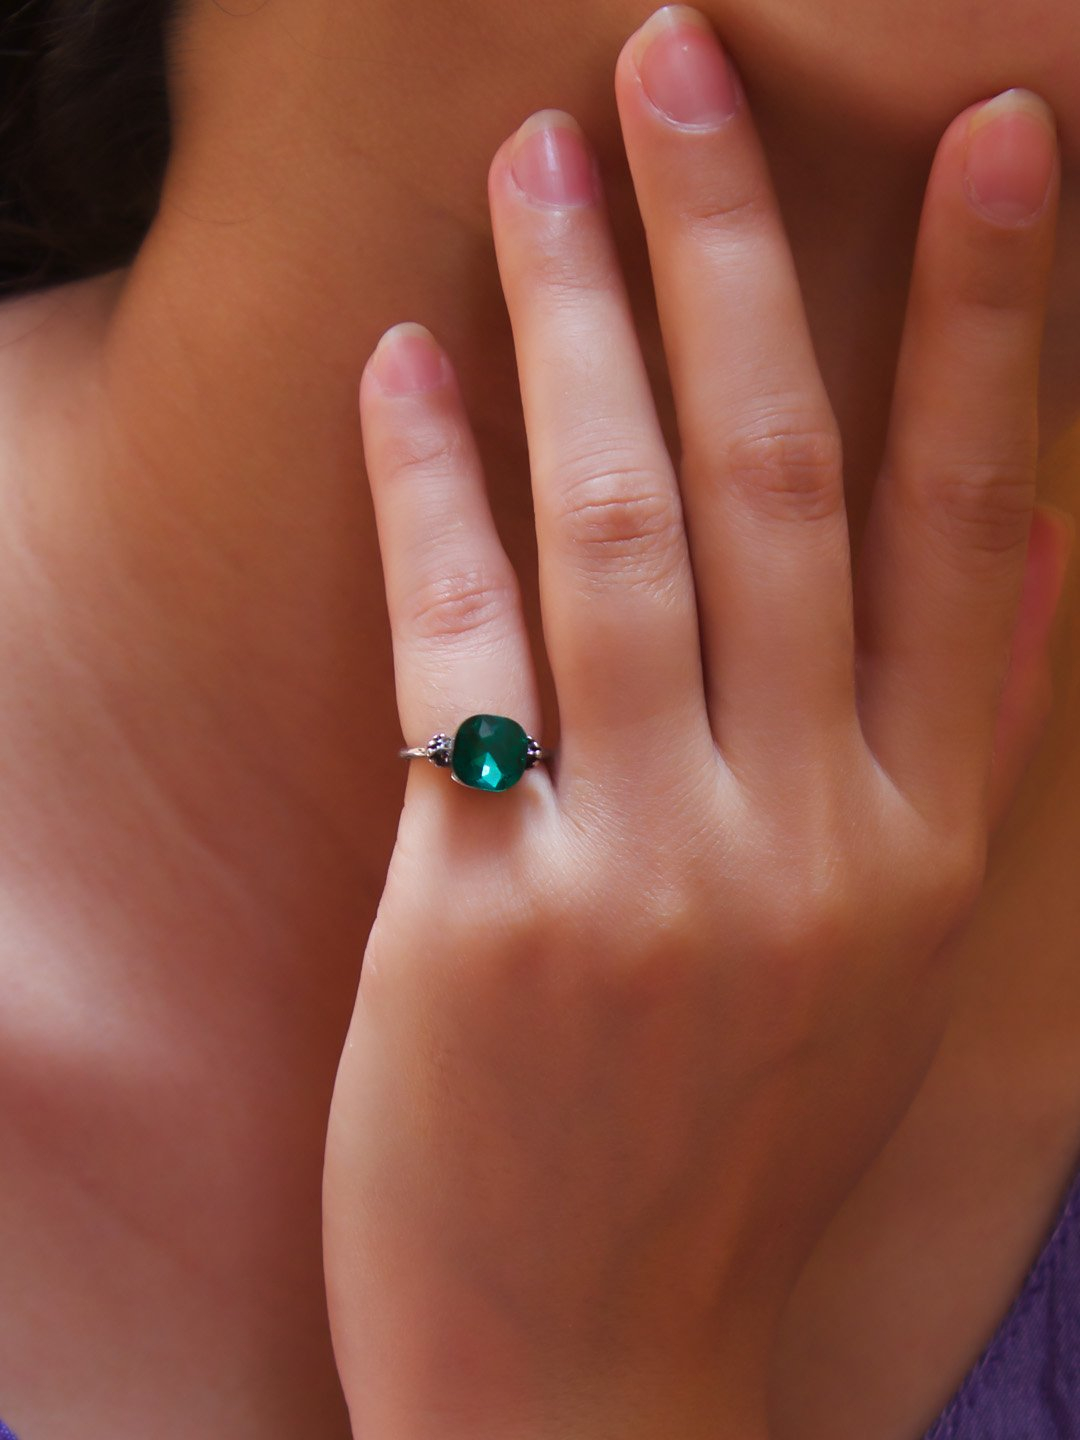 Who should wear an Emerald (astrological benefit)